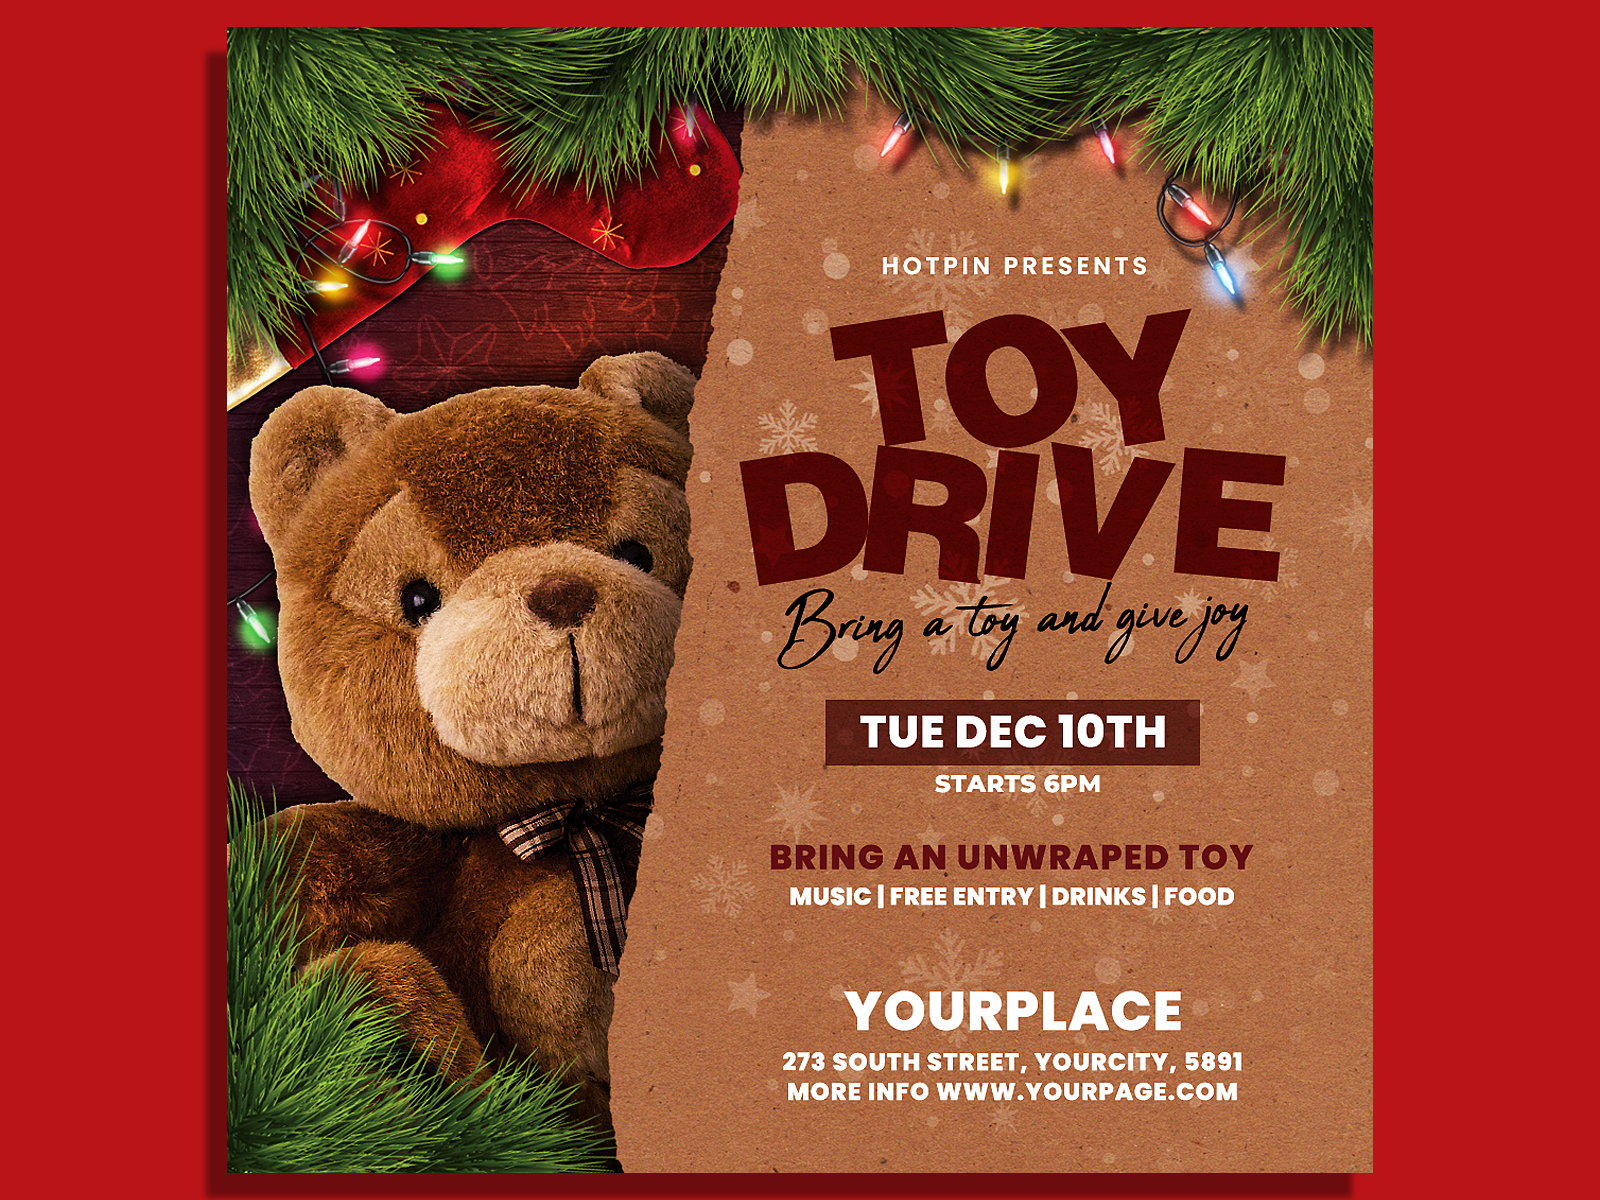 Christmas Toy Drive Flyer Template by Hotpin on Dribbble